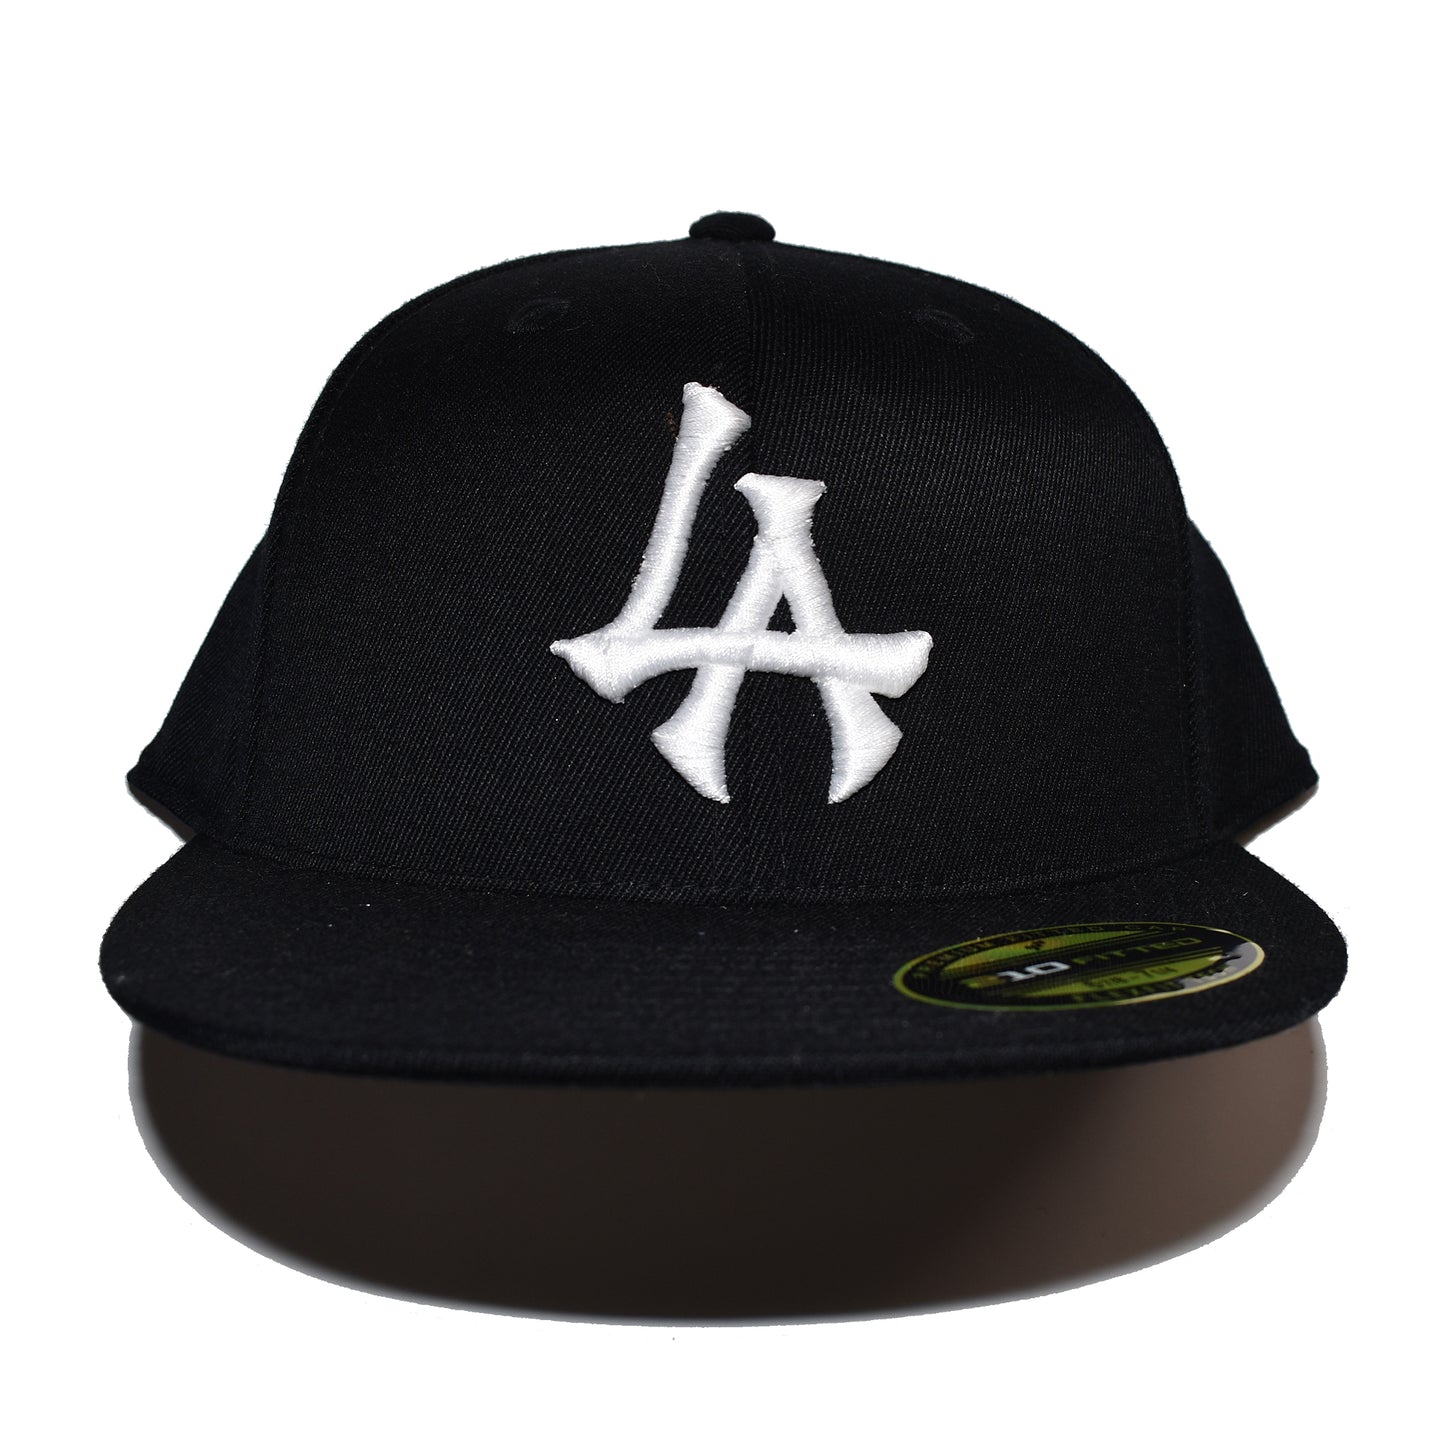 NEW LA Fitted Hat